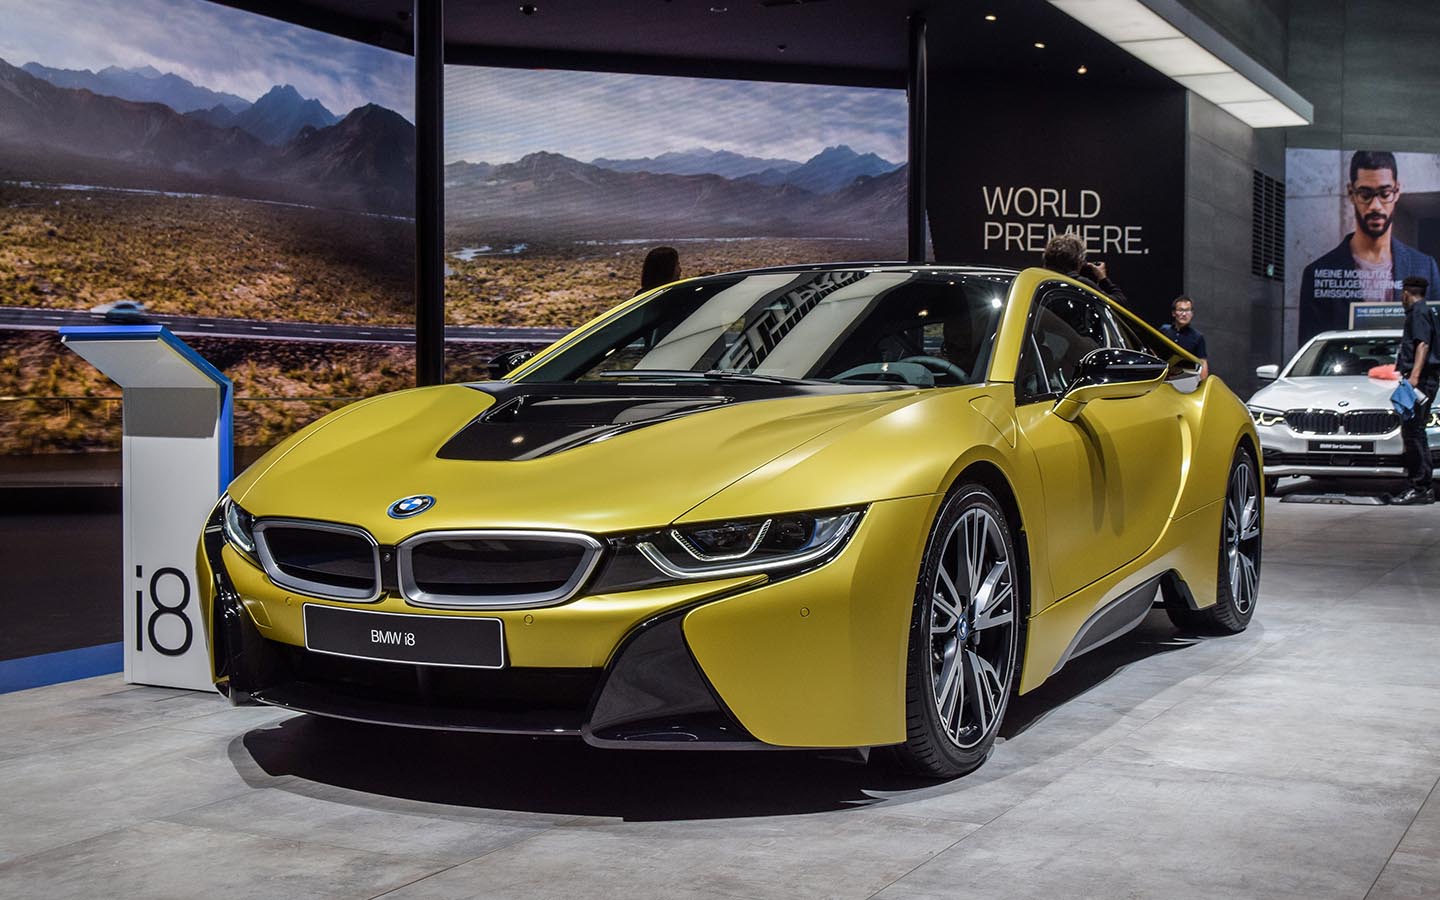 BMW i8 facts premiered as a concept car initially